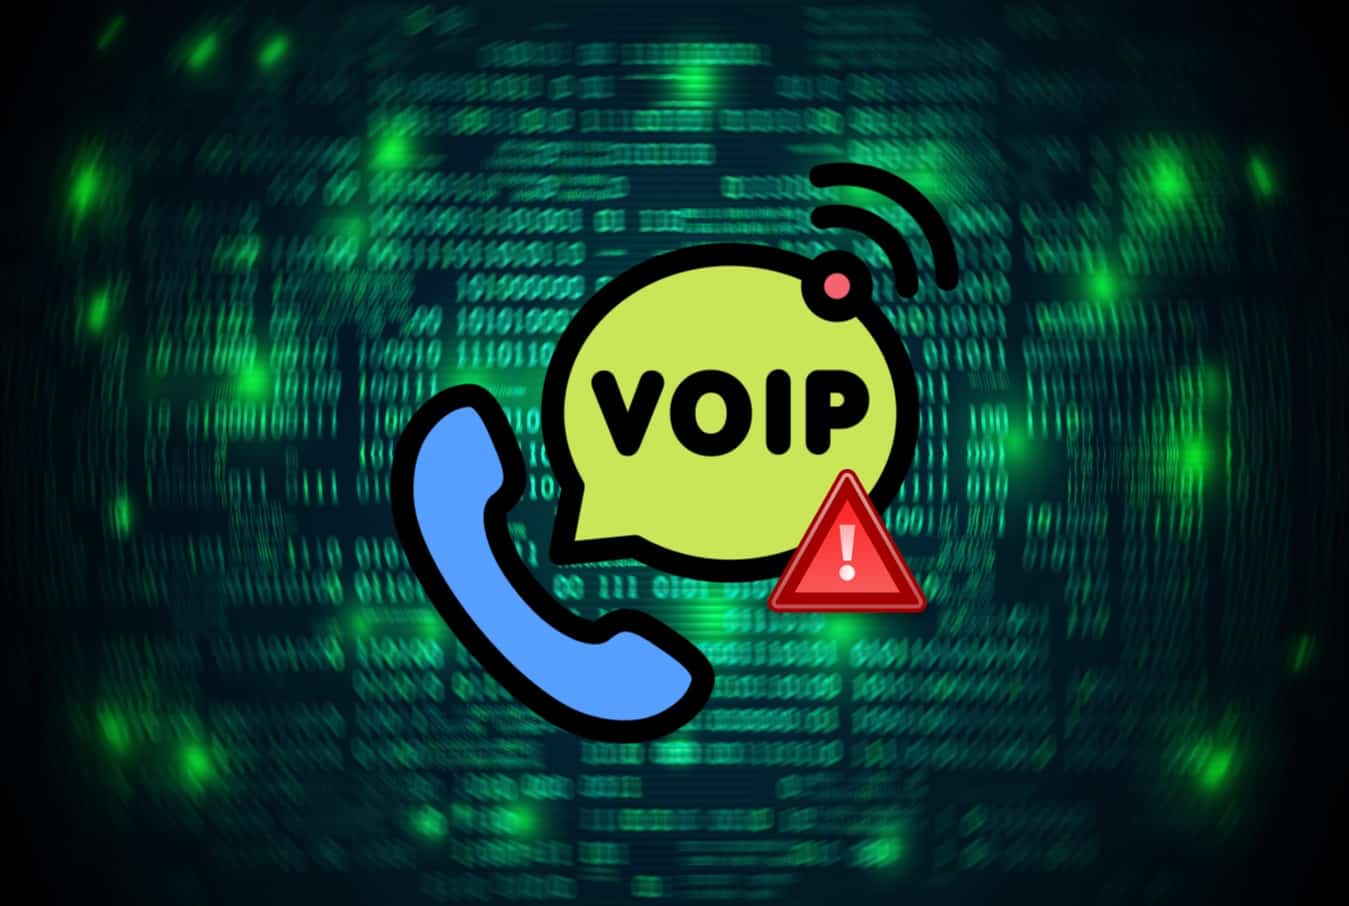 CDRThief malware targets Linux VoIP softwitches to steal call records